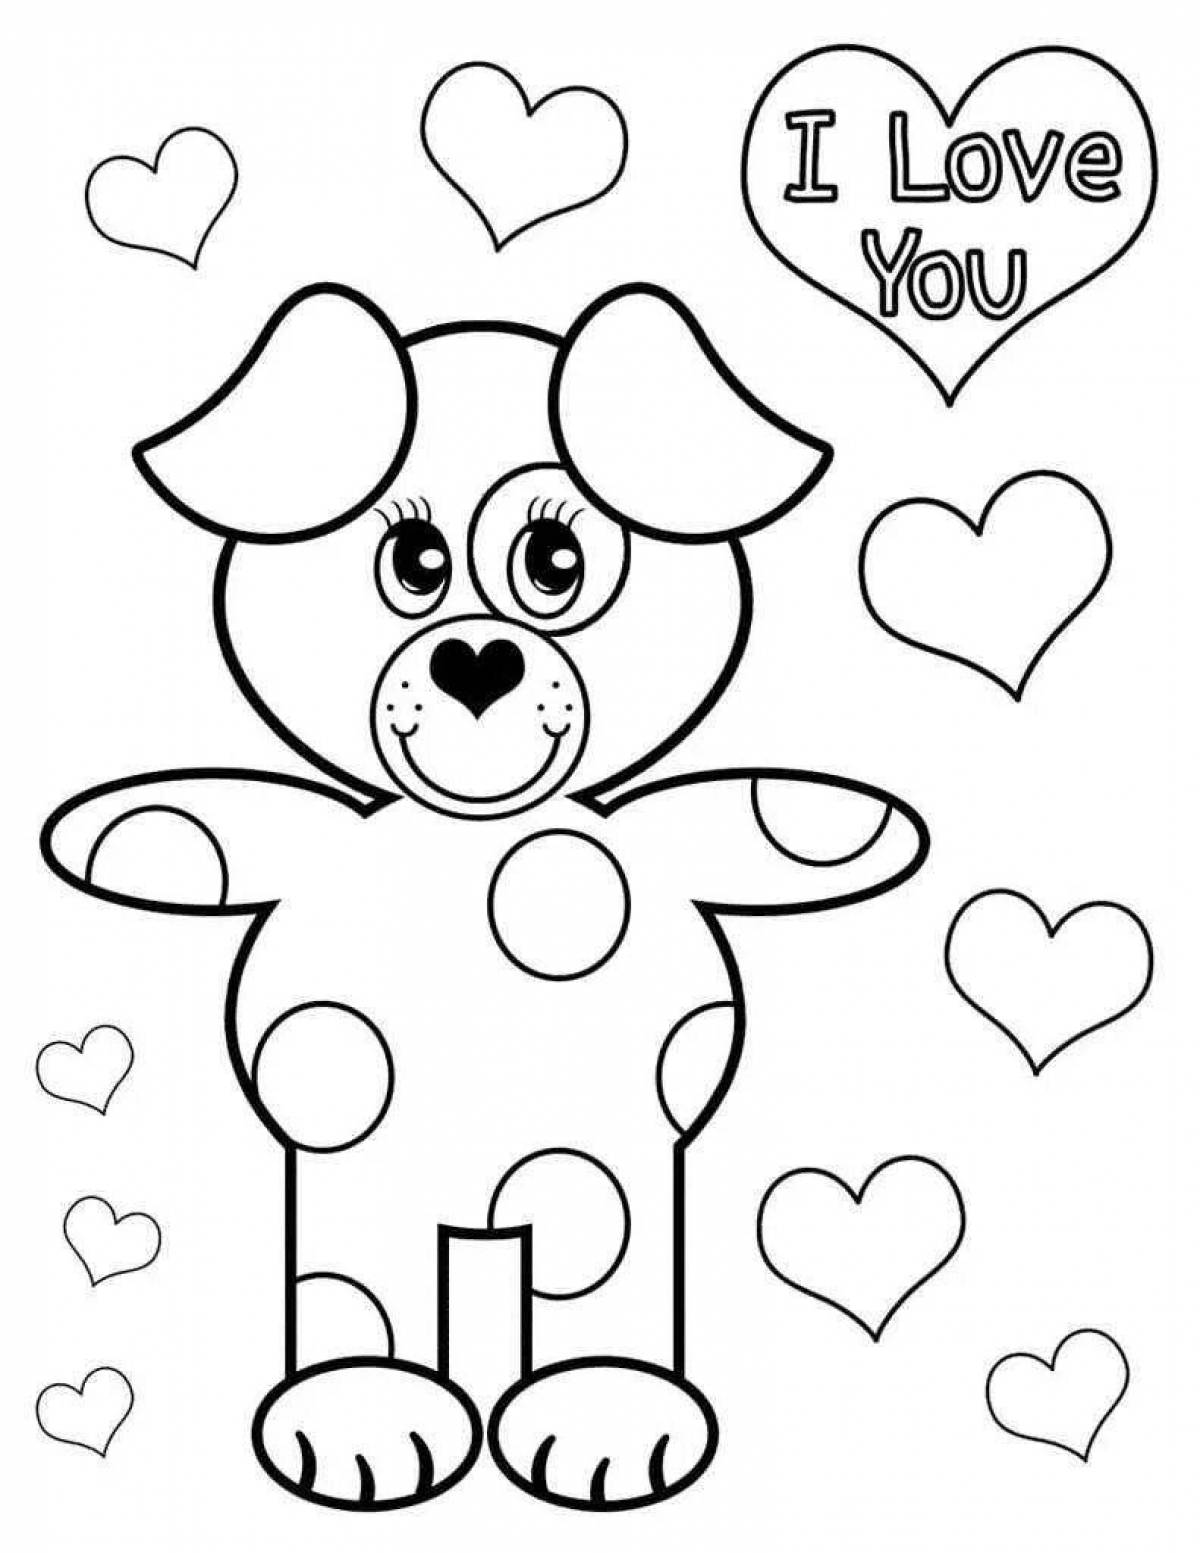 Lively 14 february coloring page